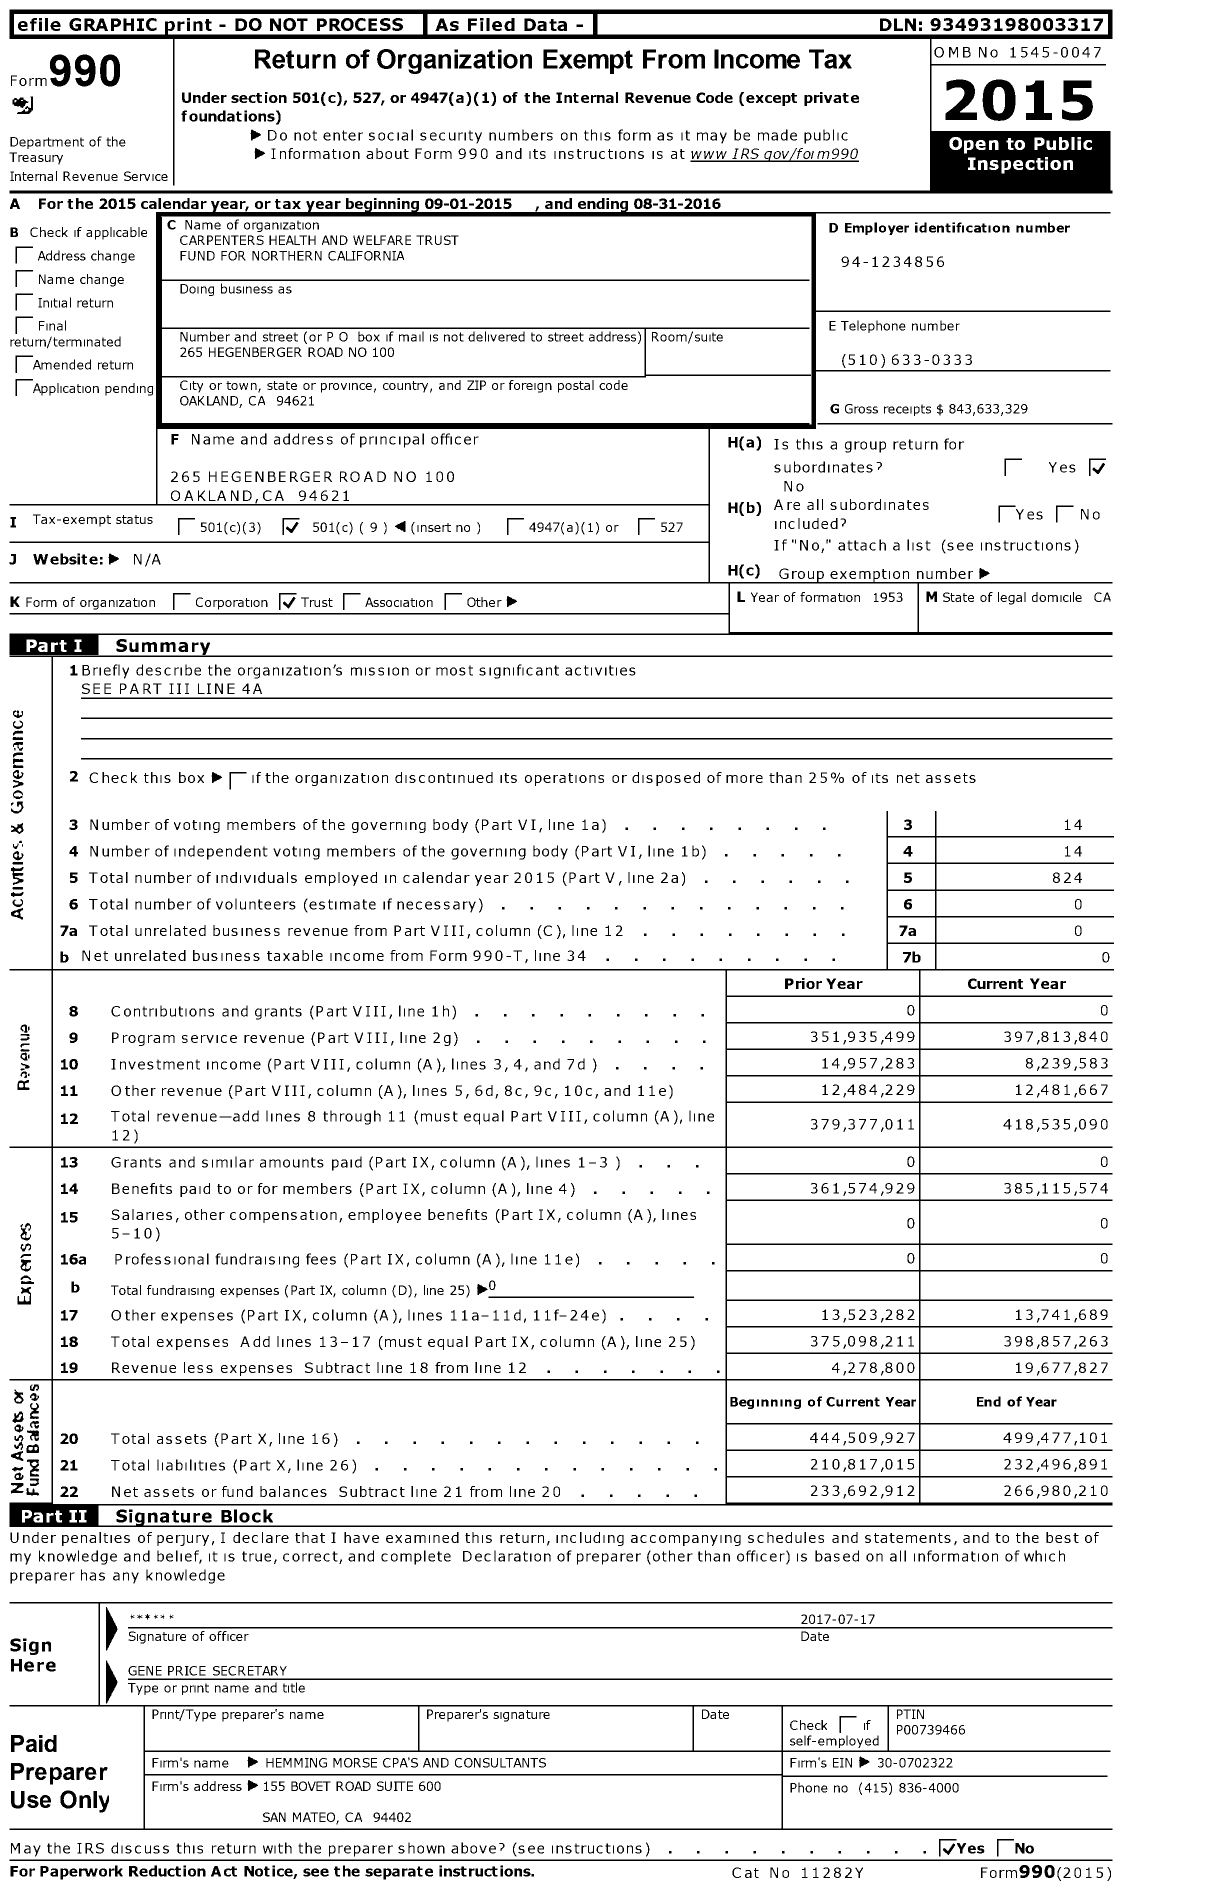 Image of first page of 2015 Form 990O for Carpenters Health and Welfare Trust Fund for Northern California